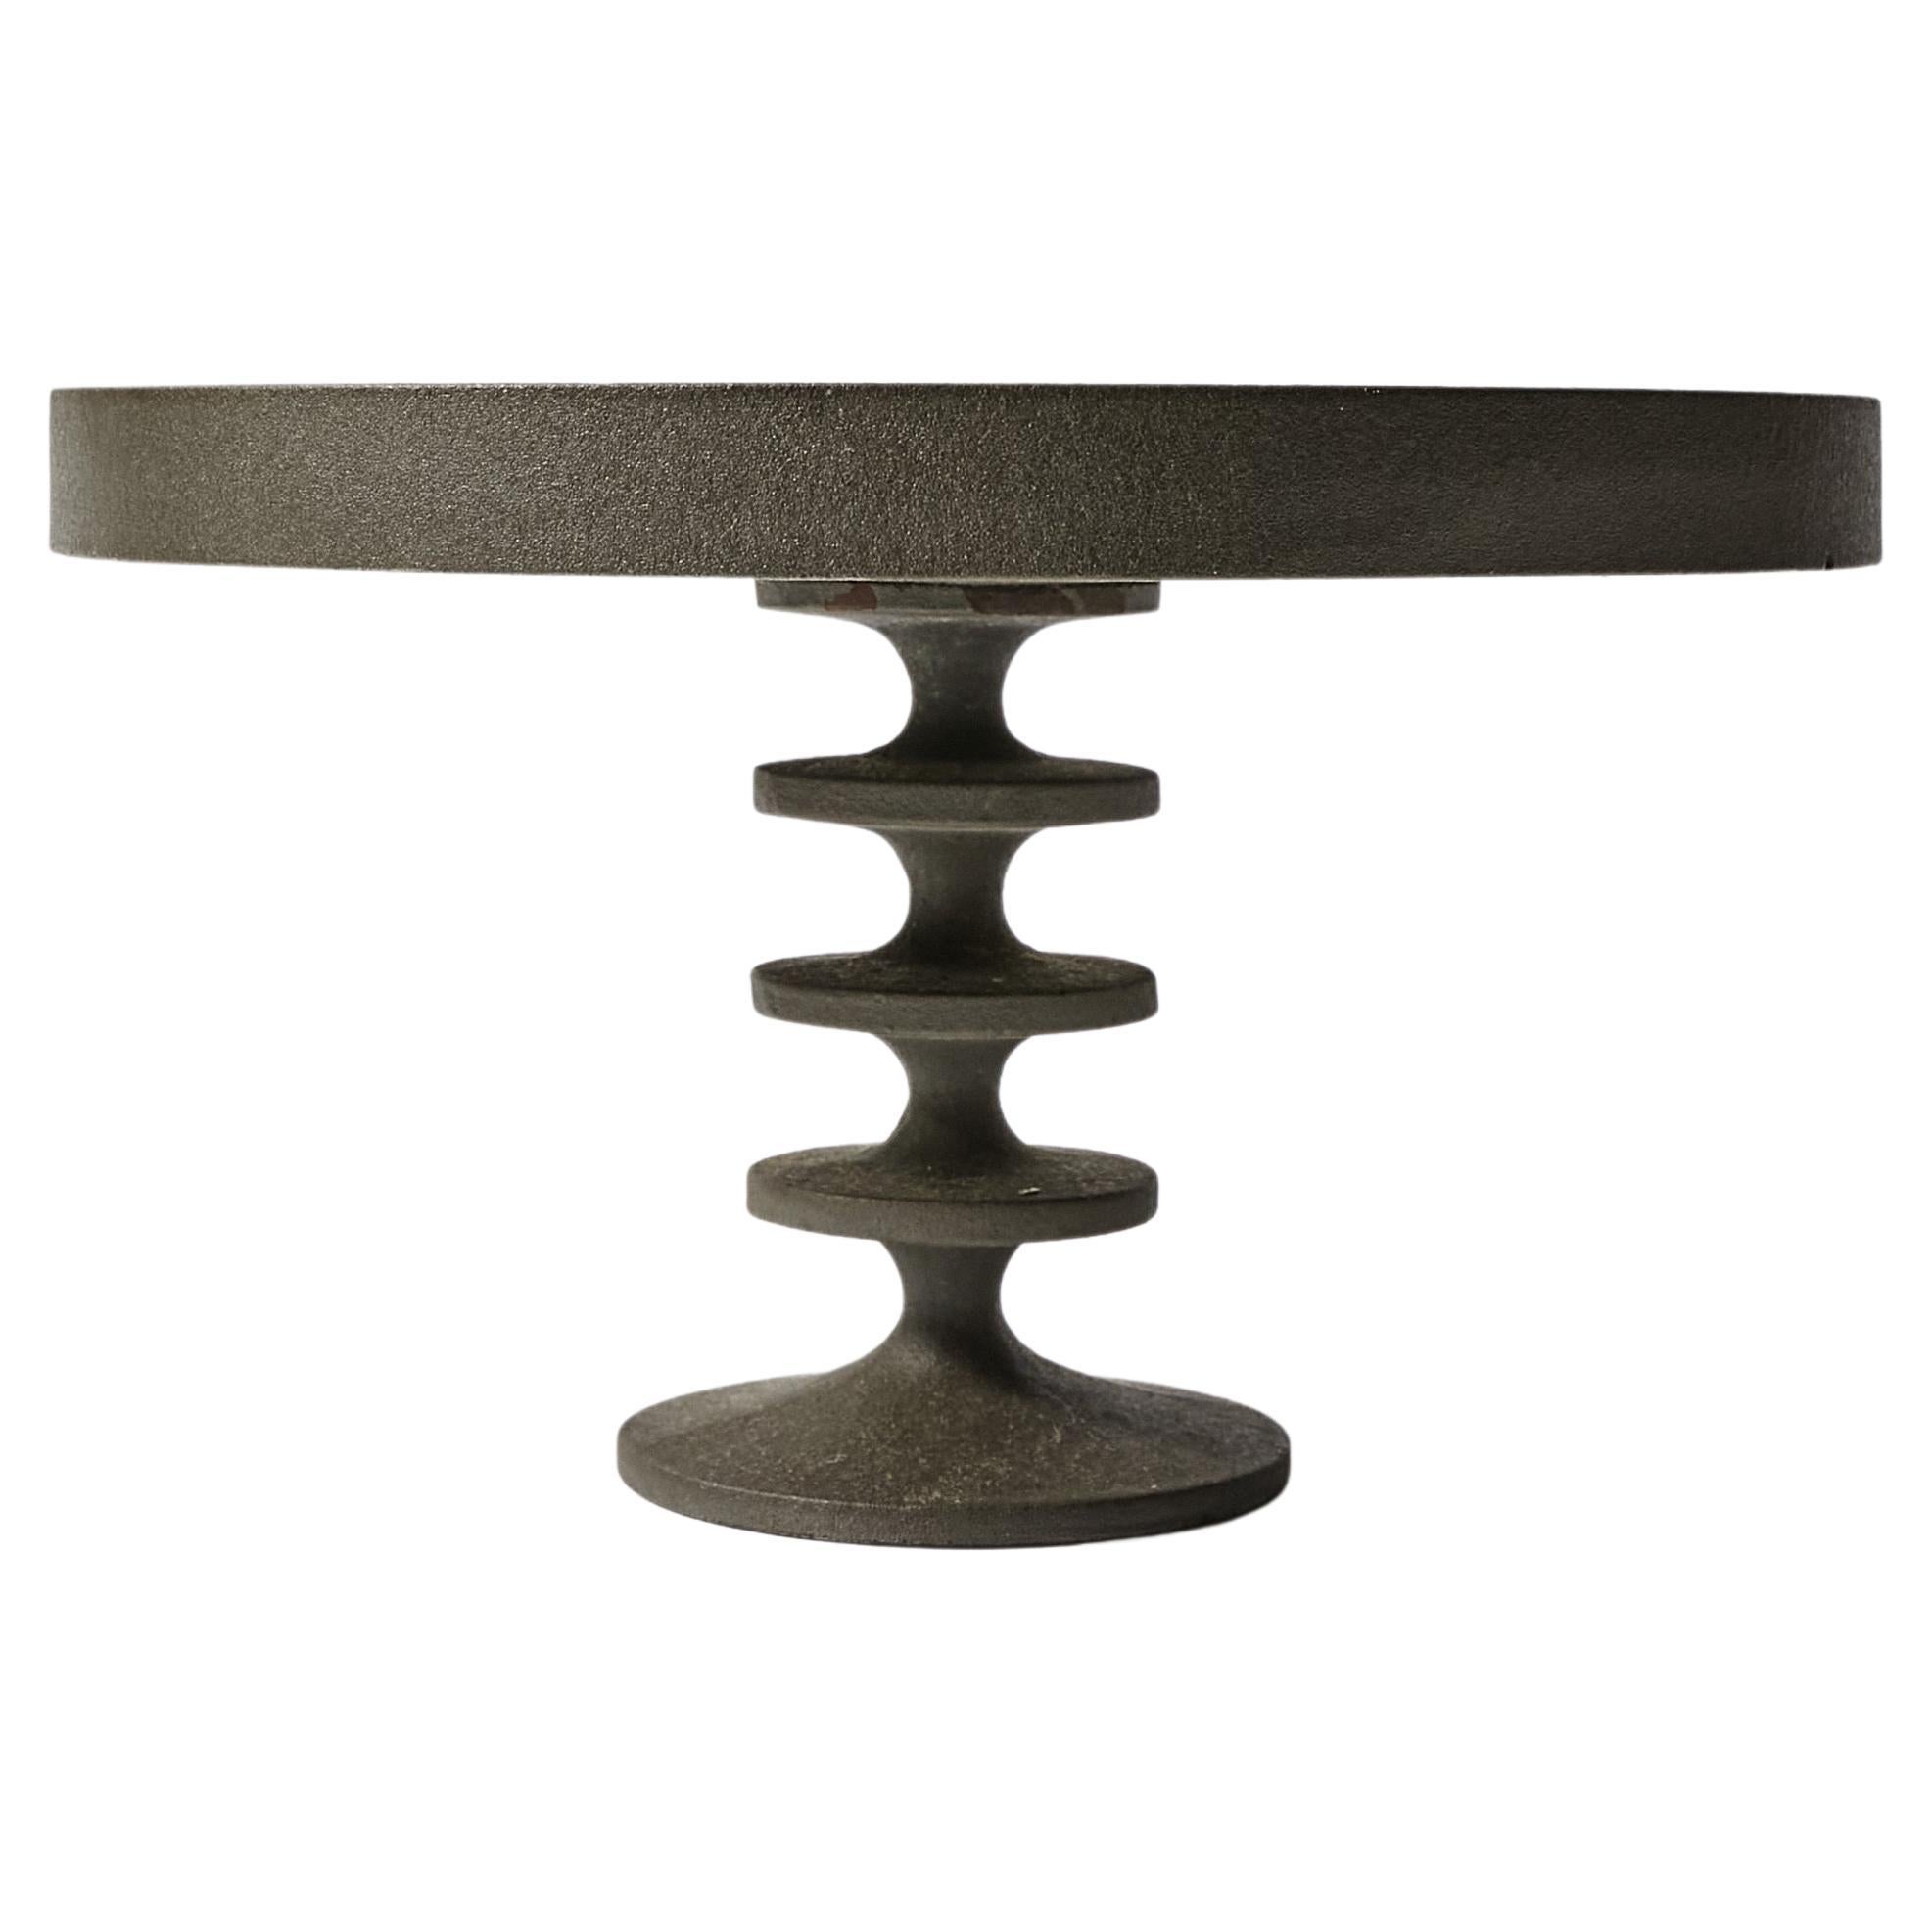 Cake Stand by Robert Welch